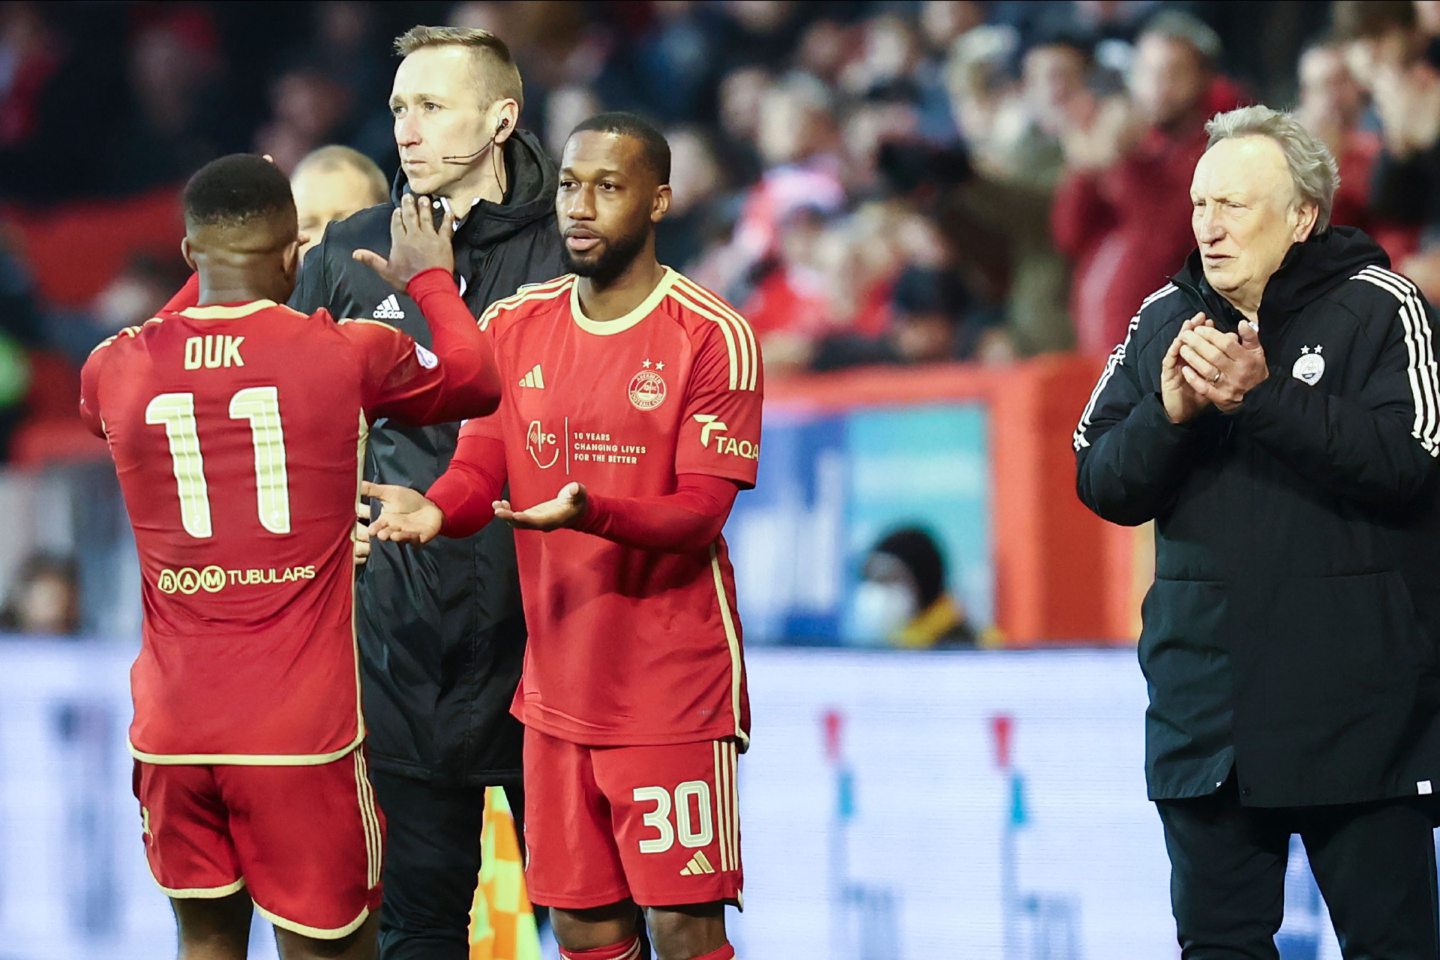 Junior Hoilett (30) of Aberdeen is substituted on for Duk for his debut. Image: Shutterstock